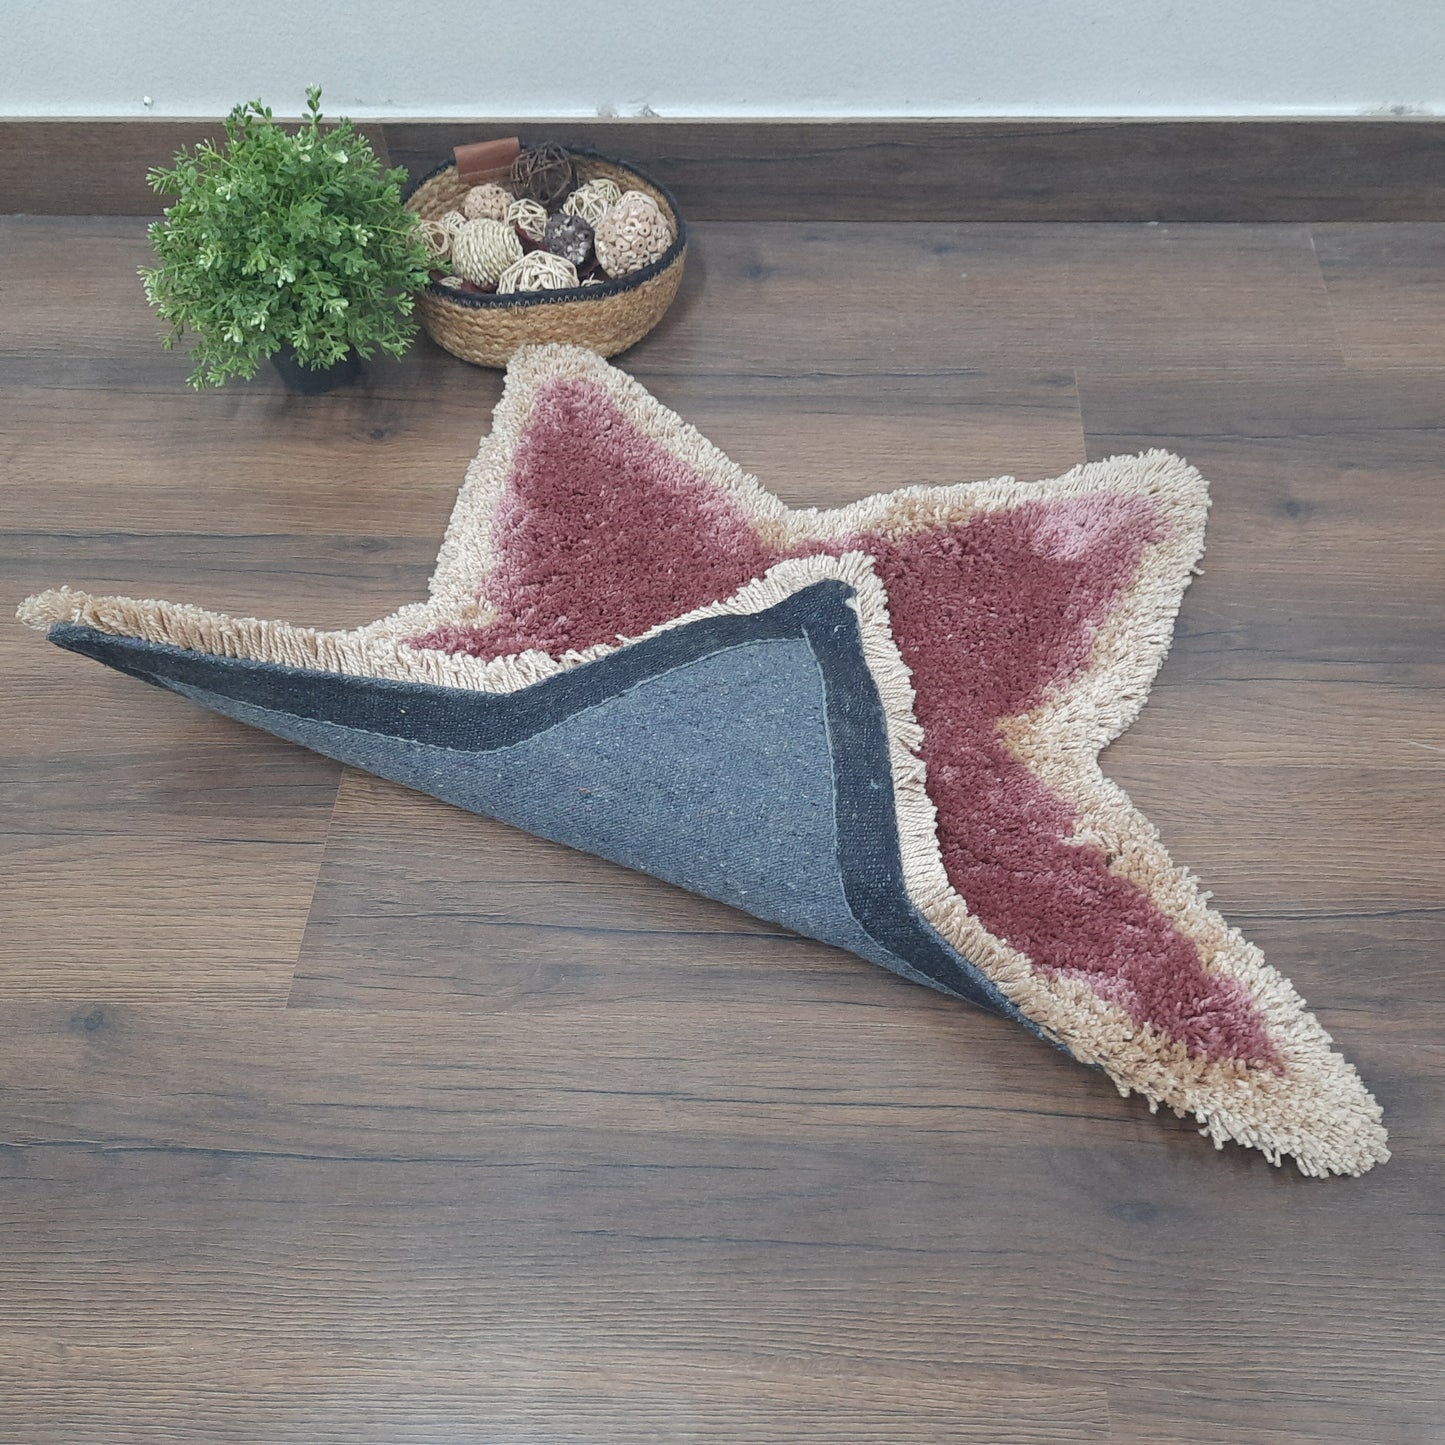 Shaggy Kids Carpet | Washable | Hand Woven Star Shape Super Luxurious Feel | Export Quality-Berry Blush And Beige-75X75 Cms (2.5×2.5 Feet)